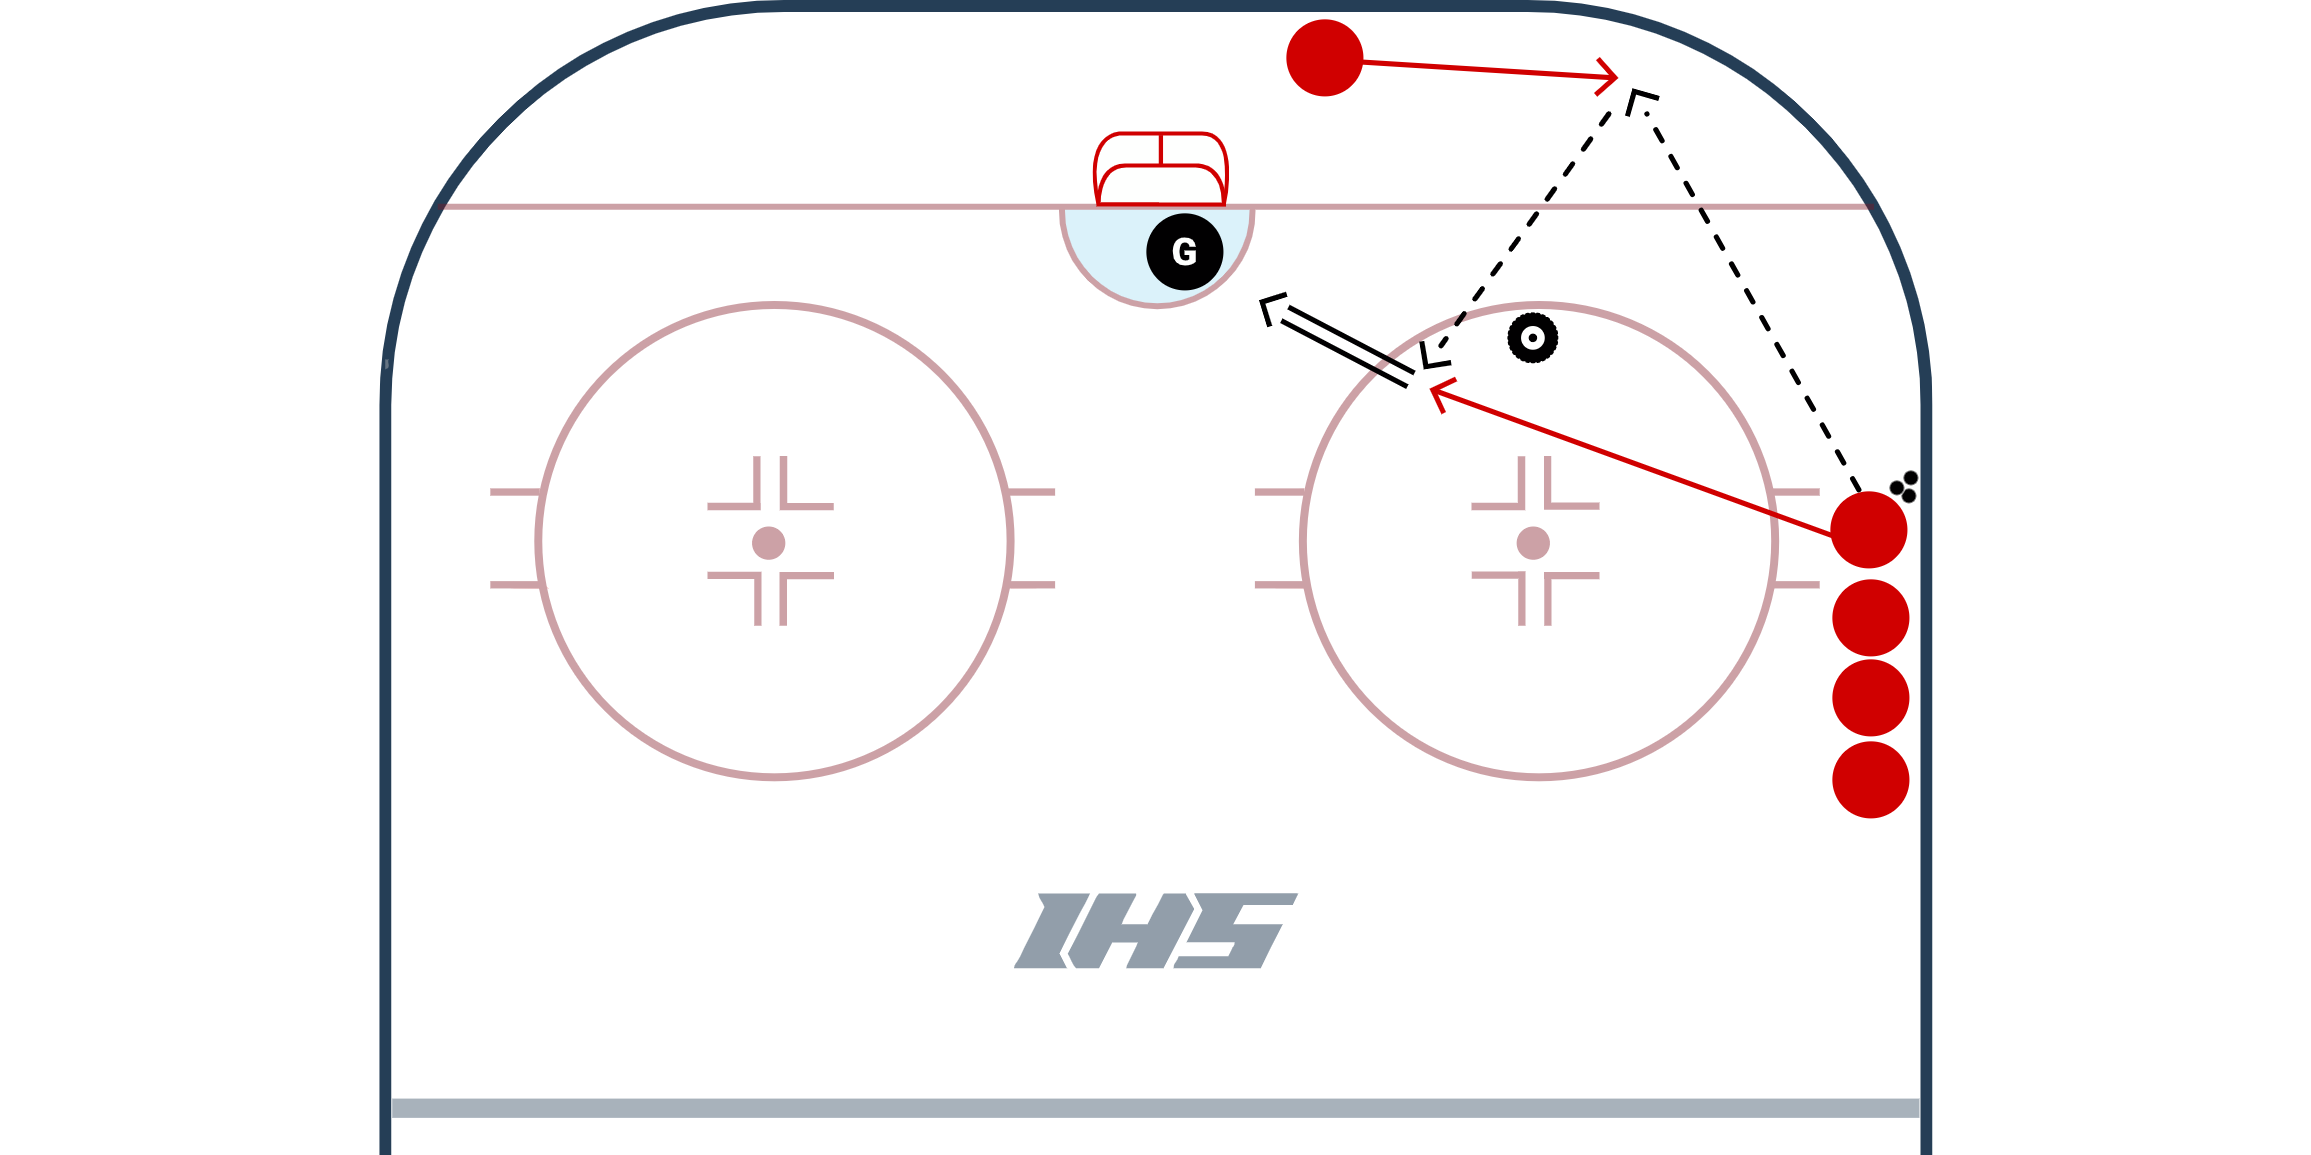 Shooting Off The Pass - Corners diagram